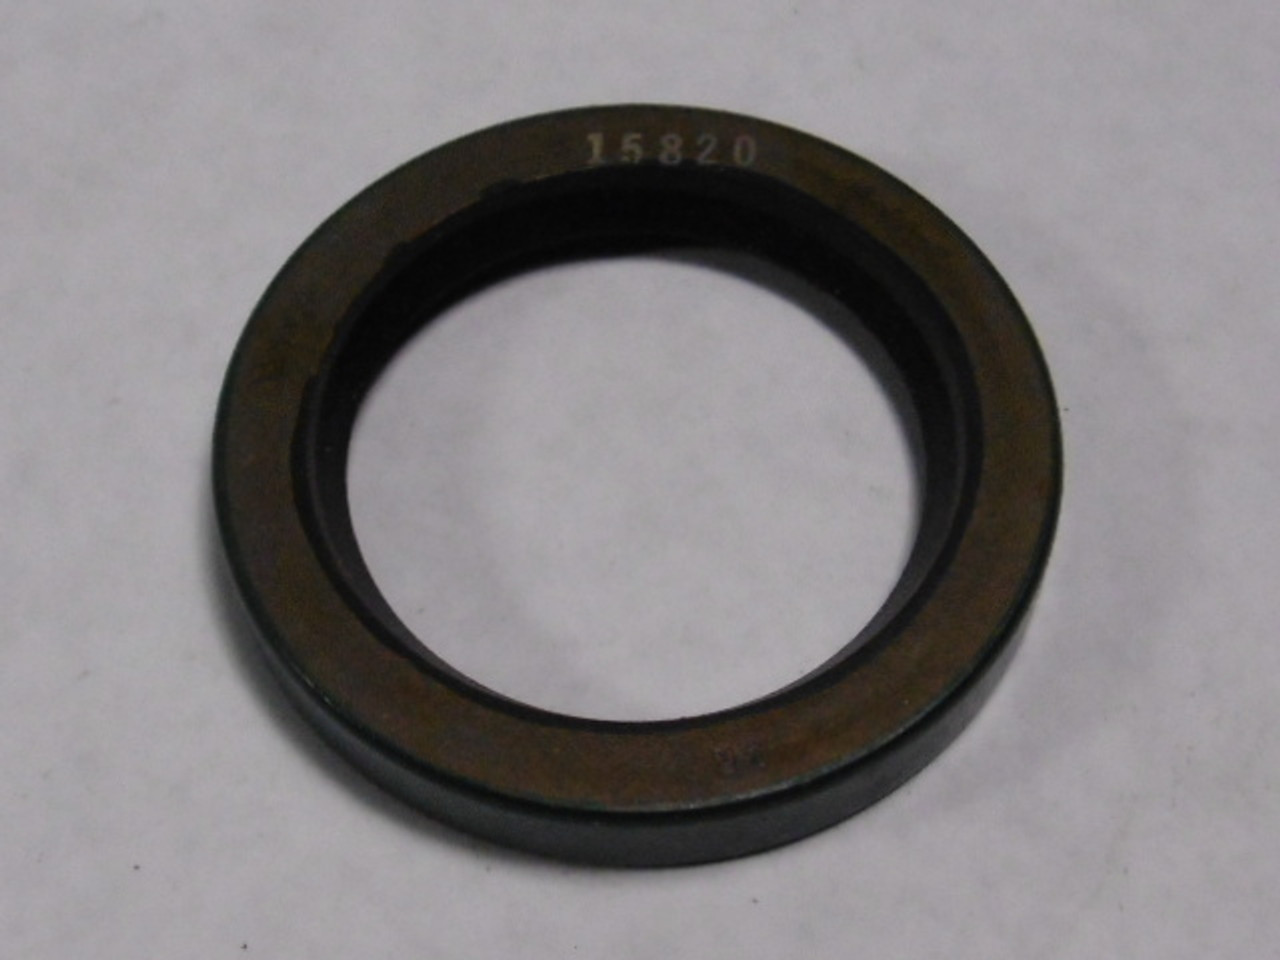 Chicago Rawhide 15820 Oil Seal 40x55x8mm ! NEW !